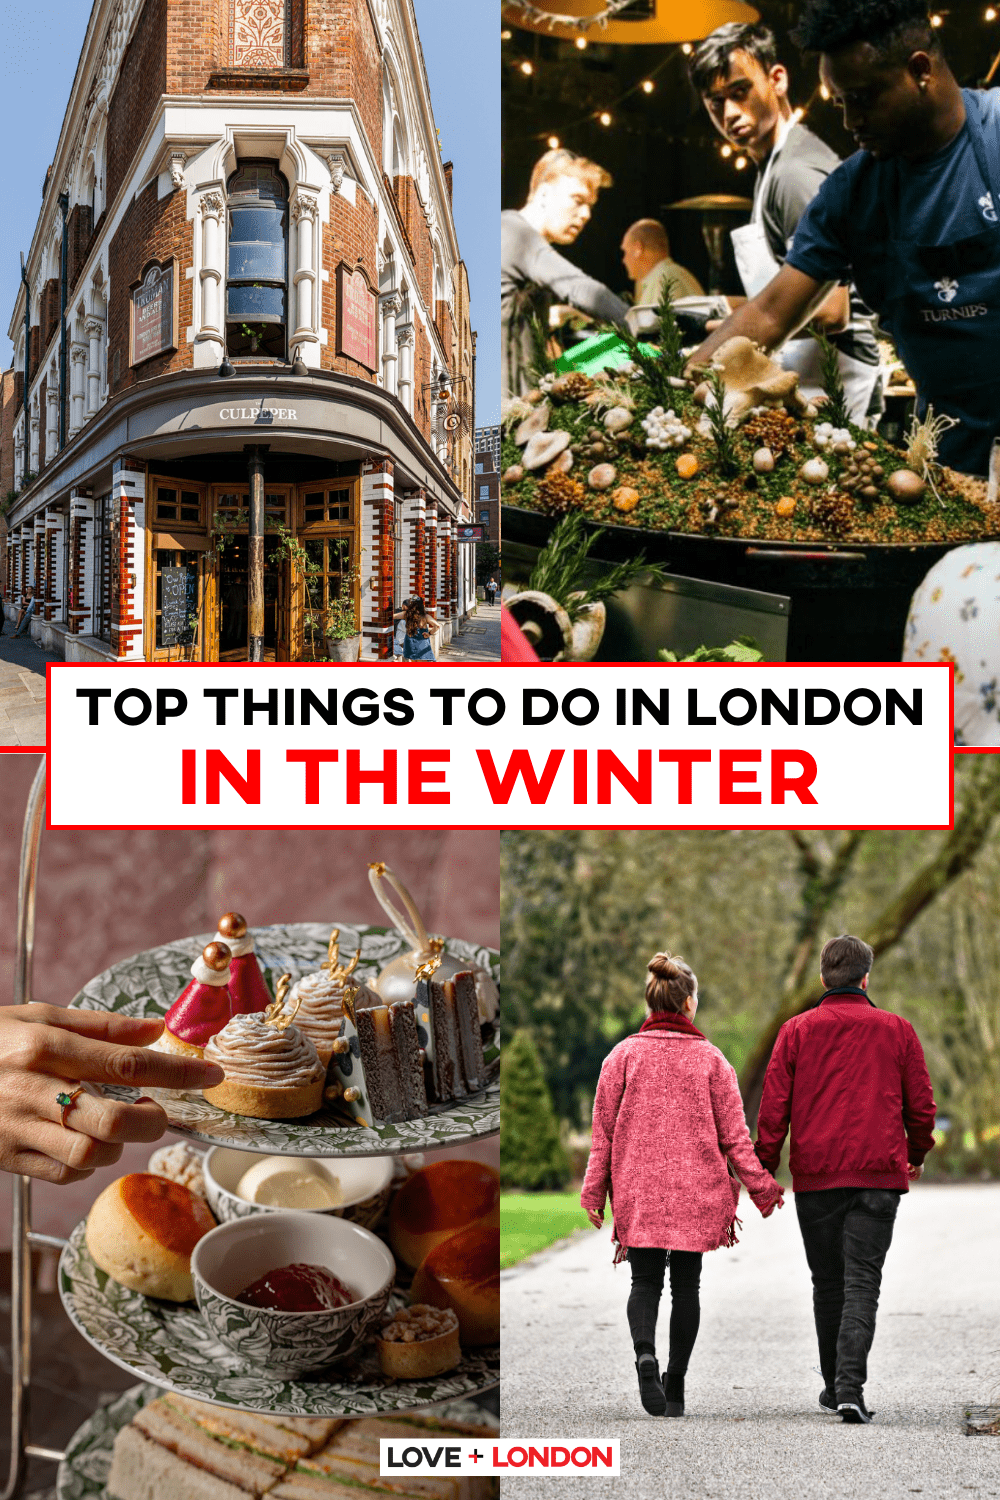 Top Things to Do in London in the Winter